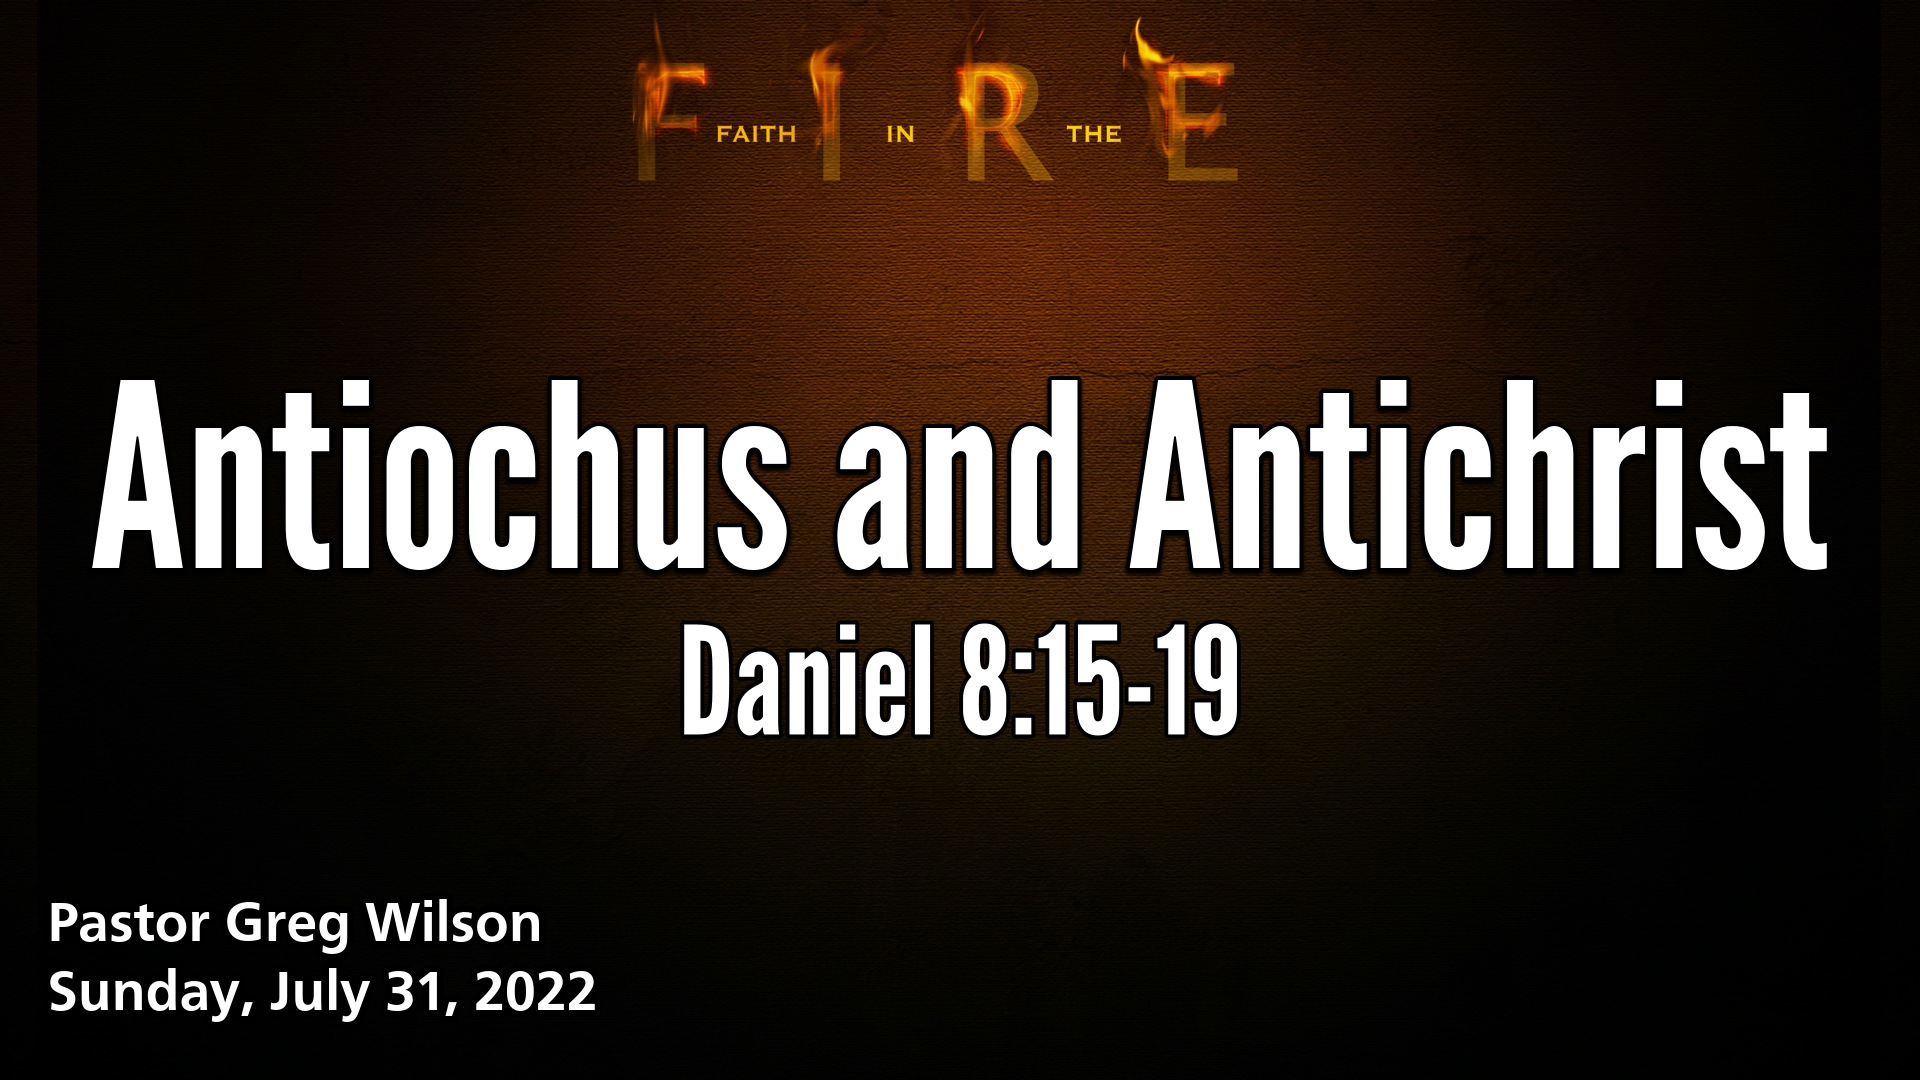 "Antiochus and Antichrist"